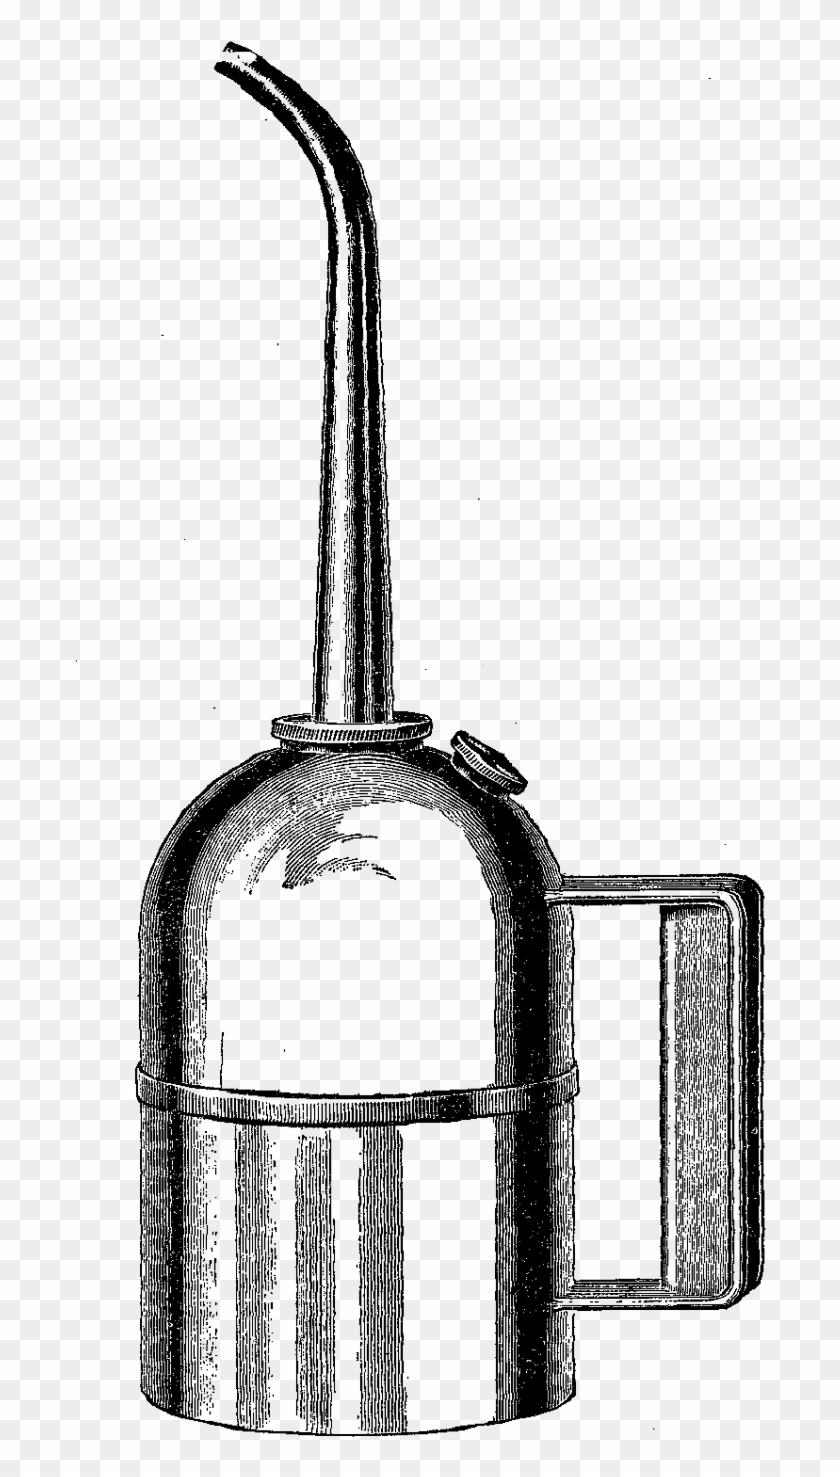 Vintage Oil Can Illustration - Drawing Clipart #4272915